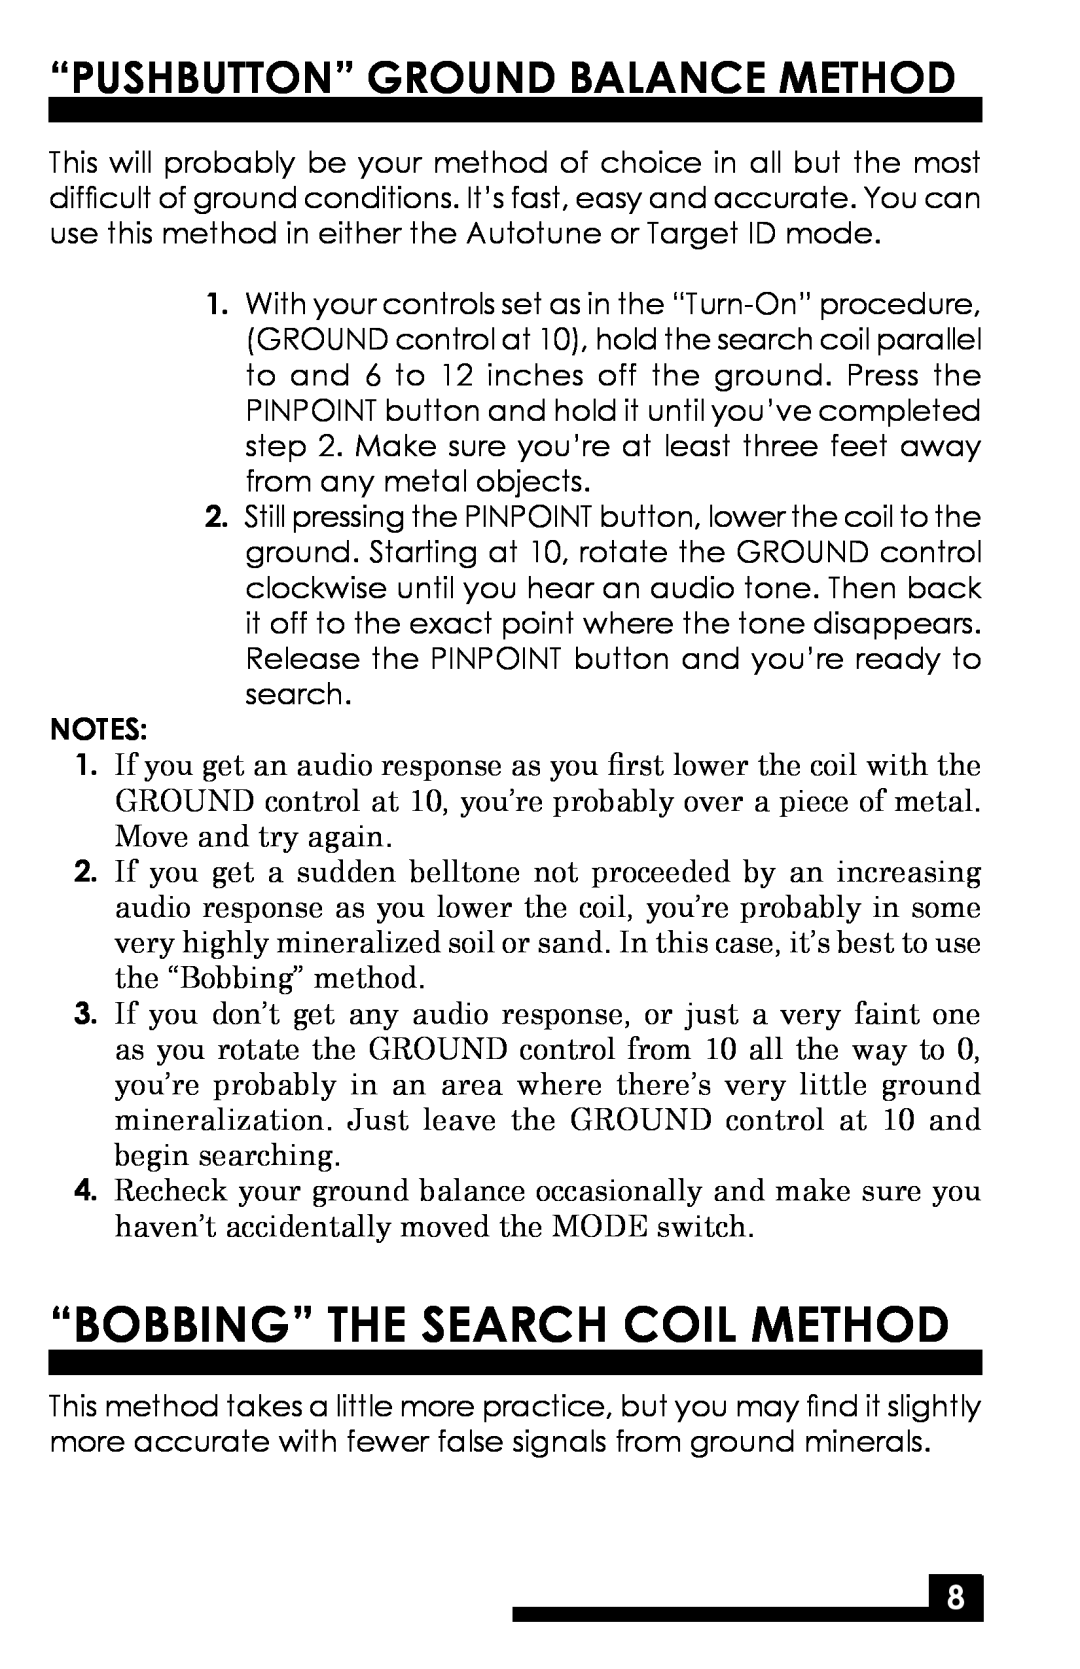 Fisher CZ-3D manual “Bobbing” The Search Coil Method, “Pushbutton” Ground Balance Method 